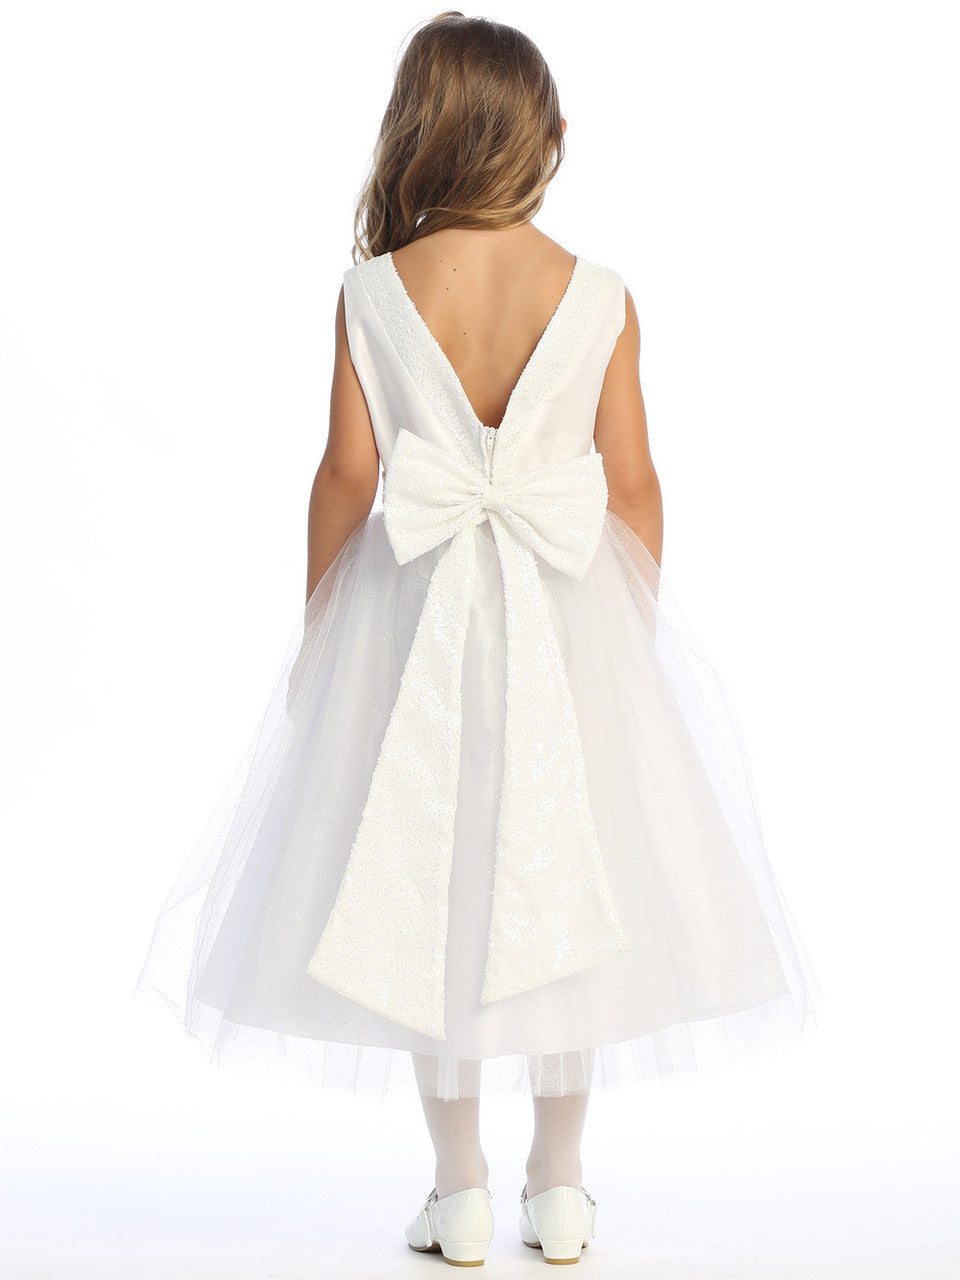 White Shantung and Sparkle Tulle Dress with Sequin Sash - BL255-WHT